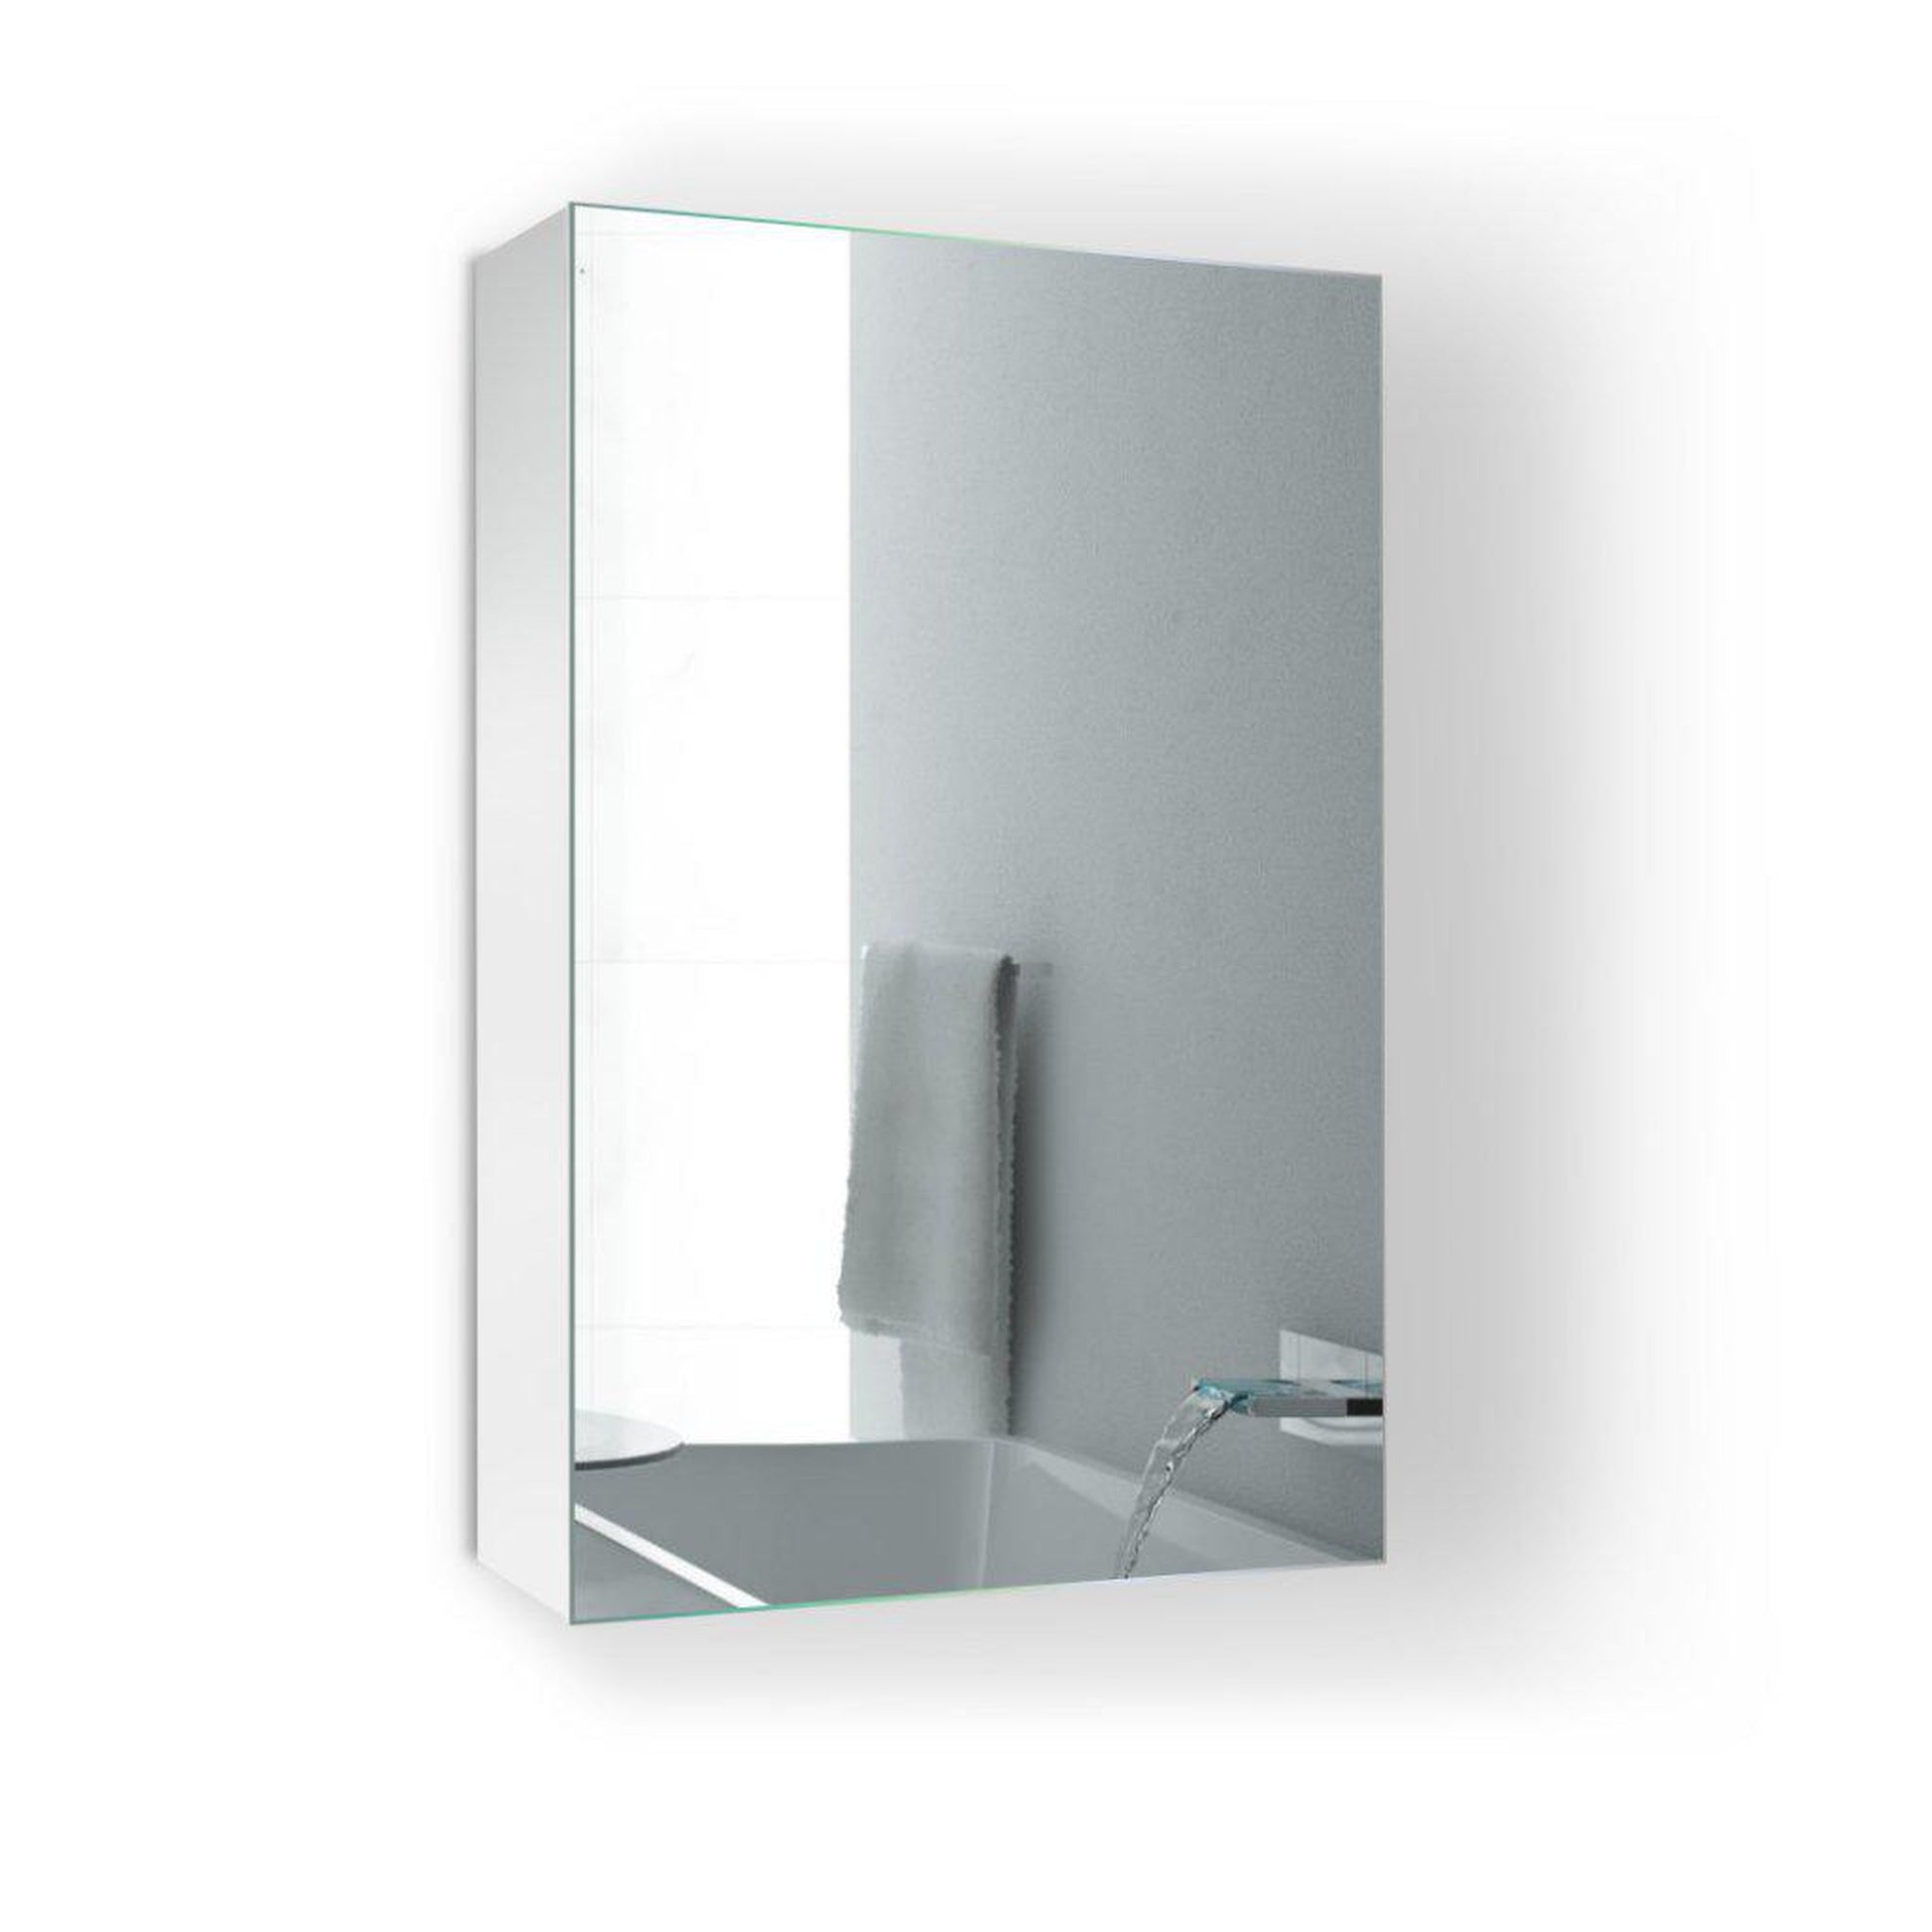 Krugg Reflections Plaza 18" x 30" Single Left Opening Rectangular Recessed/Surface-Mount Medicine Cabinet Mirror With Three Adjustable Shelves